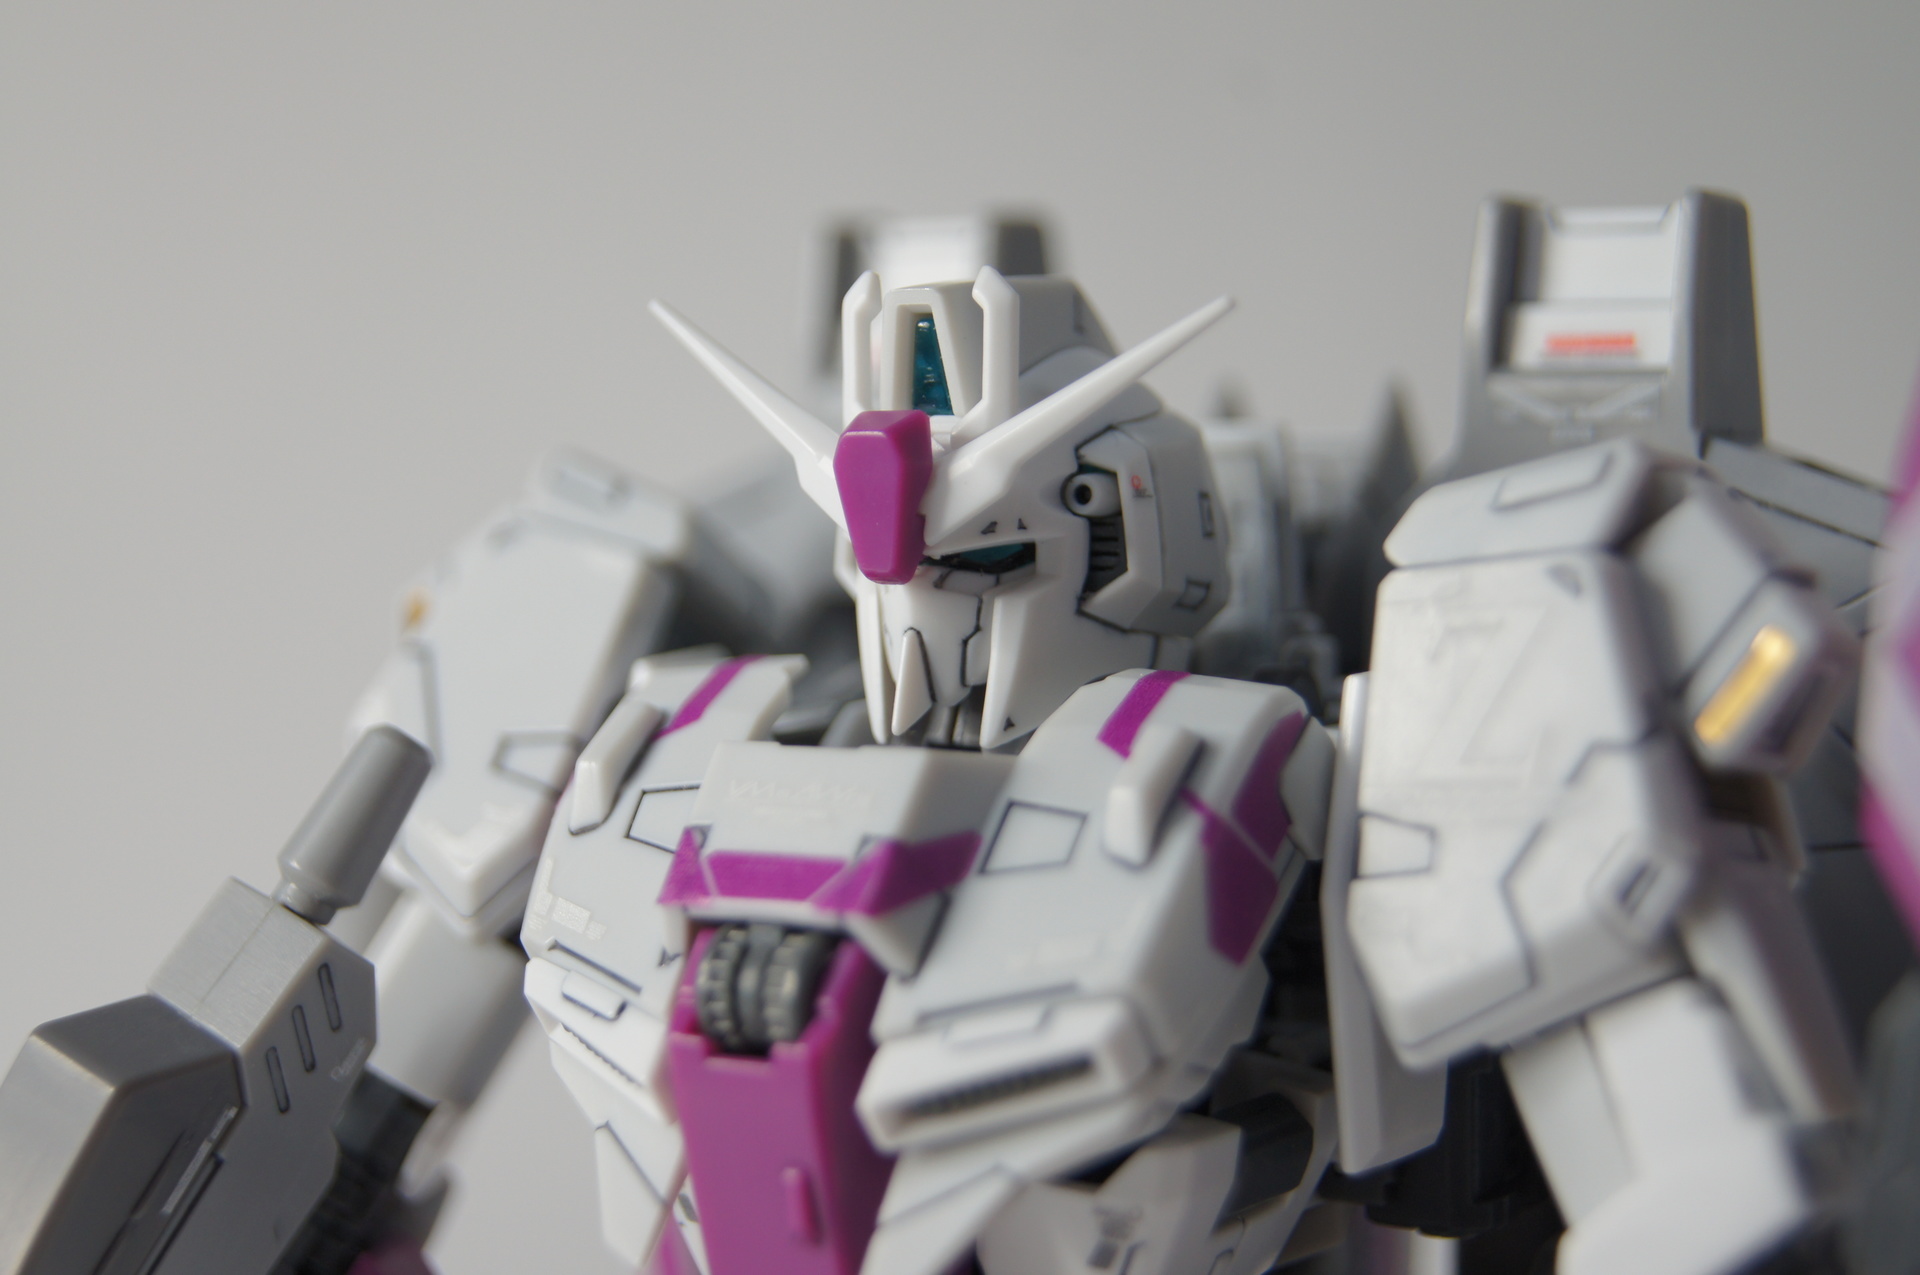 Rg Zガンダム3号機 初期検証型 Ver Gft Limited Color 8 878の あすなろ う